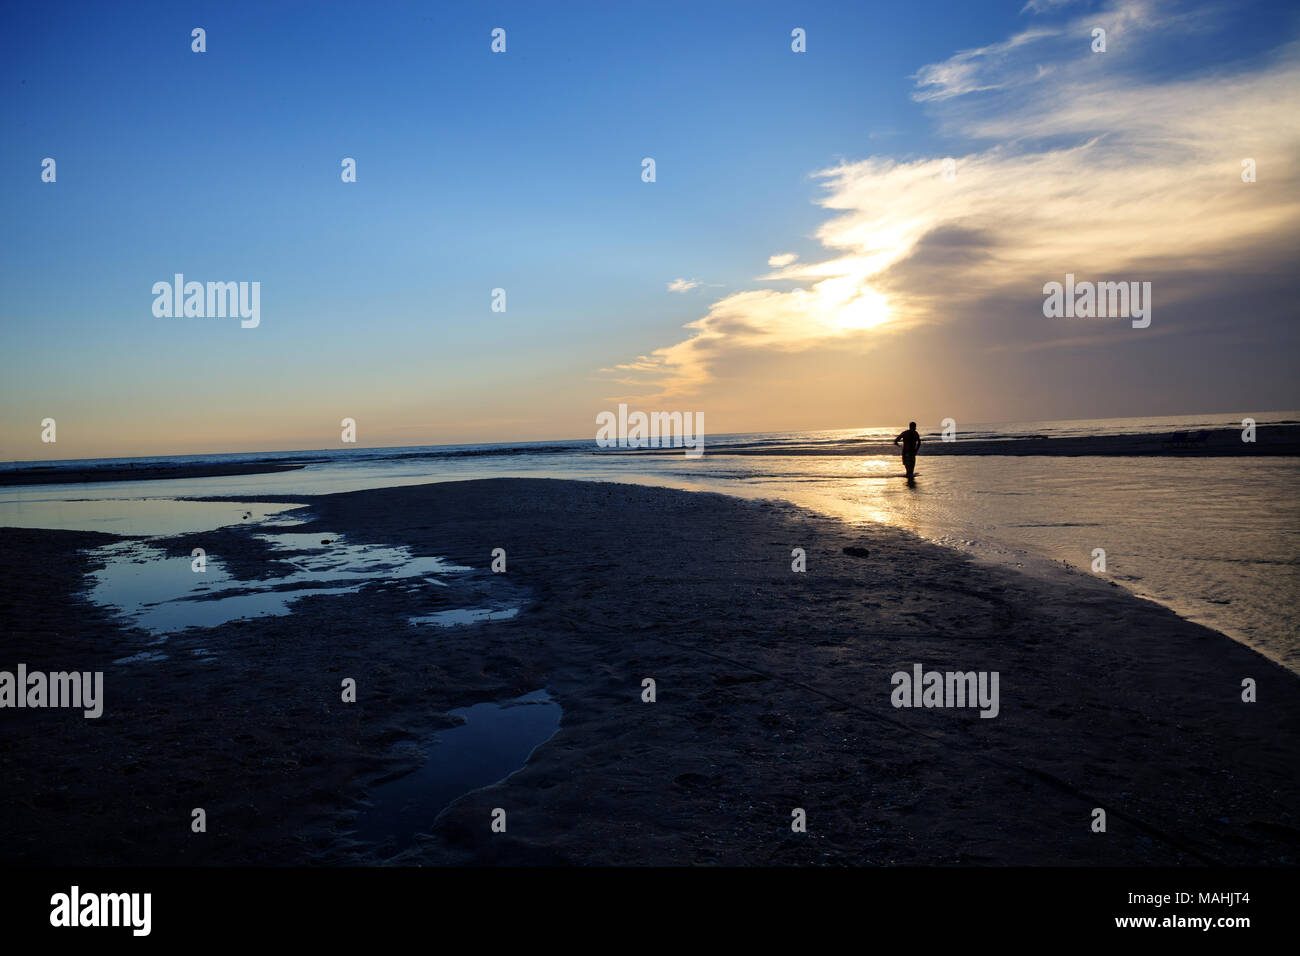 Man Silhouette at sunset in font of a River leading to the ocean at Clam Pass at dusk in Naples, Florida Stock Photo